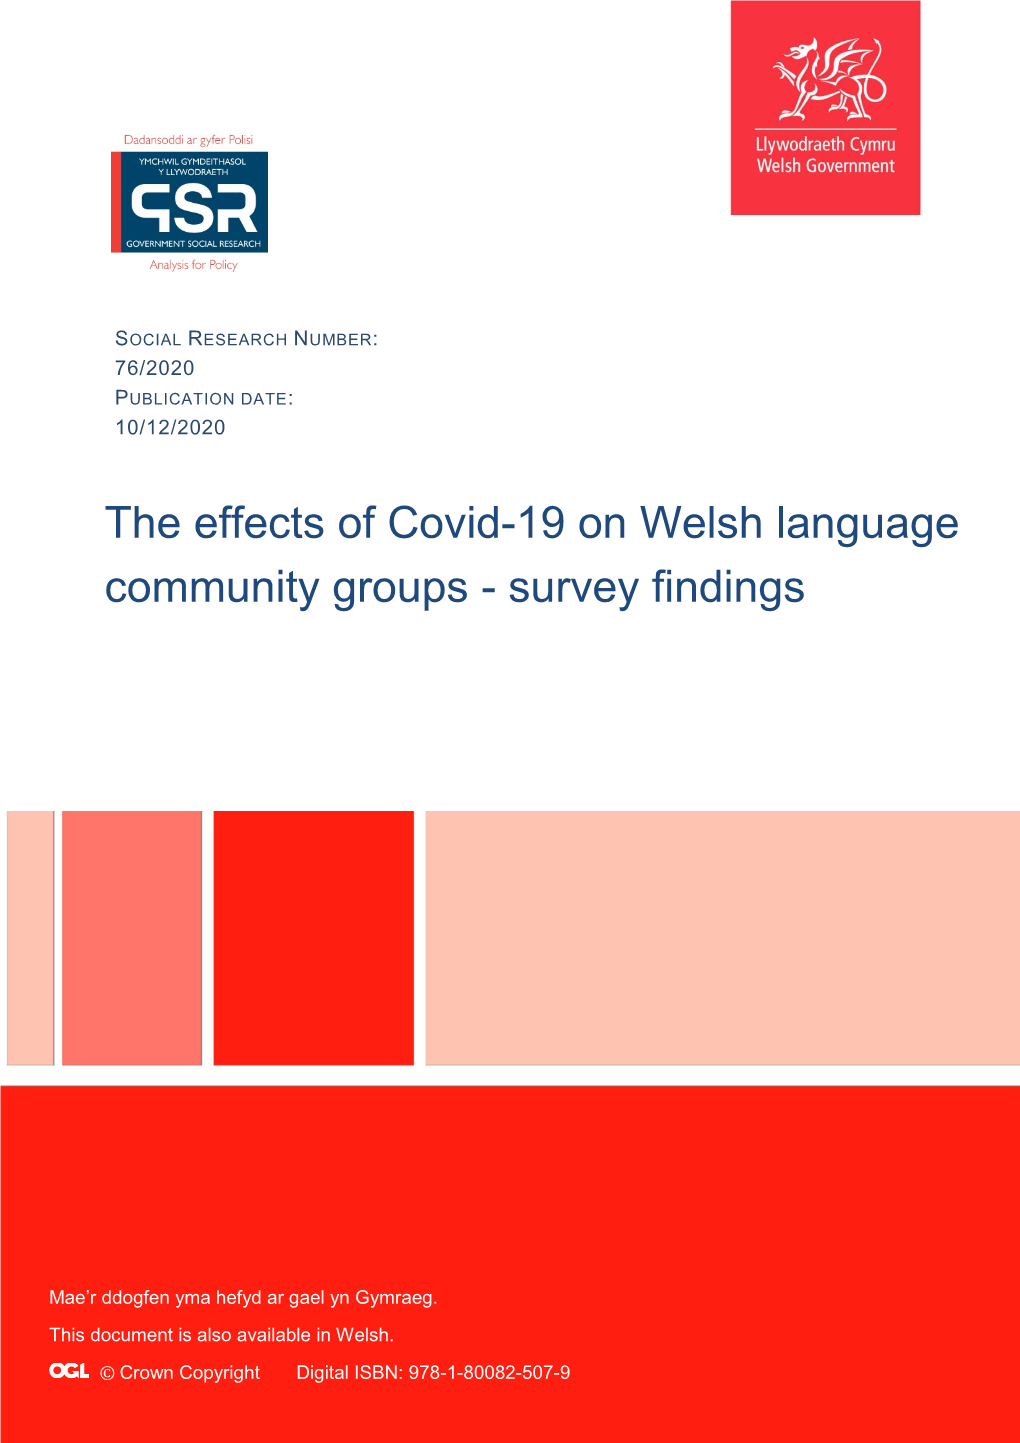 The Effects of Covid-19 on Welsh Language Community Groups - Survey Findings